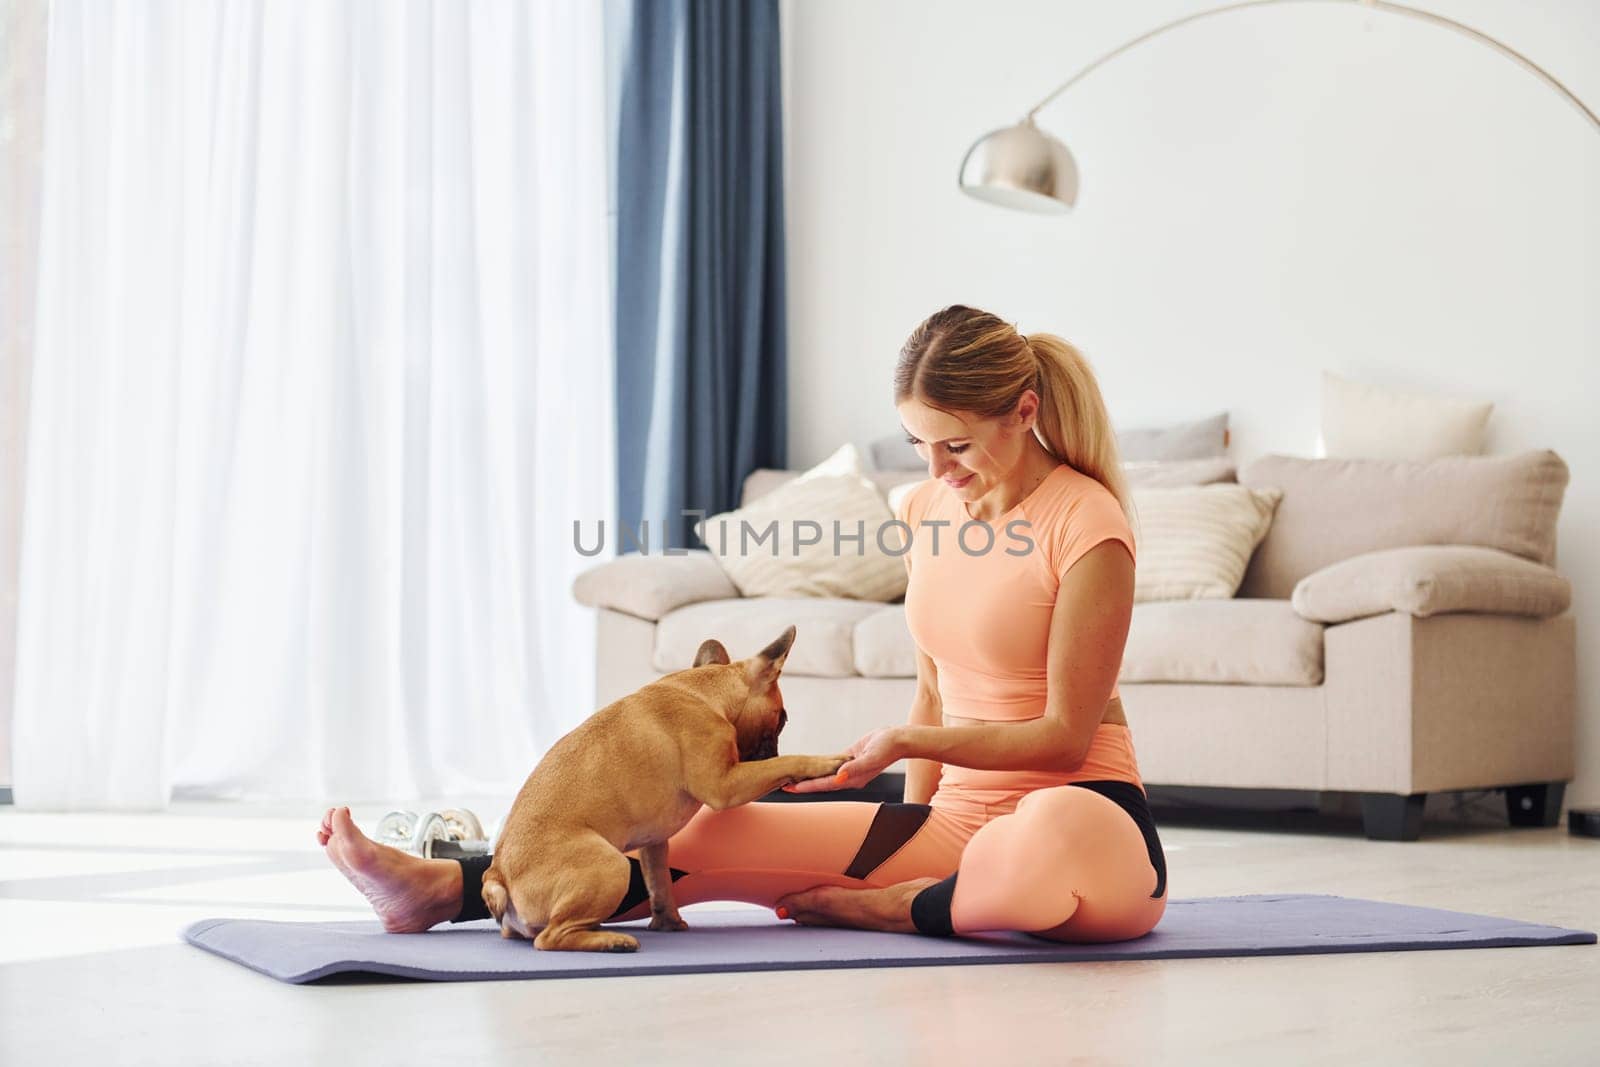 On fitness mat. Woman with pug dog is at home at daytime by Standret